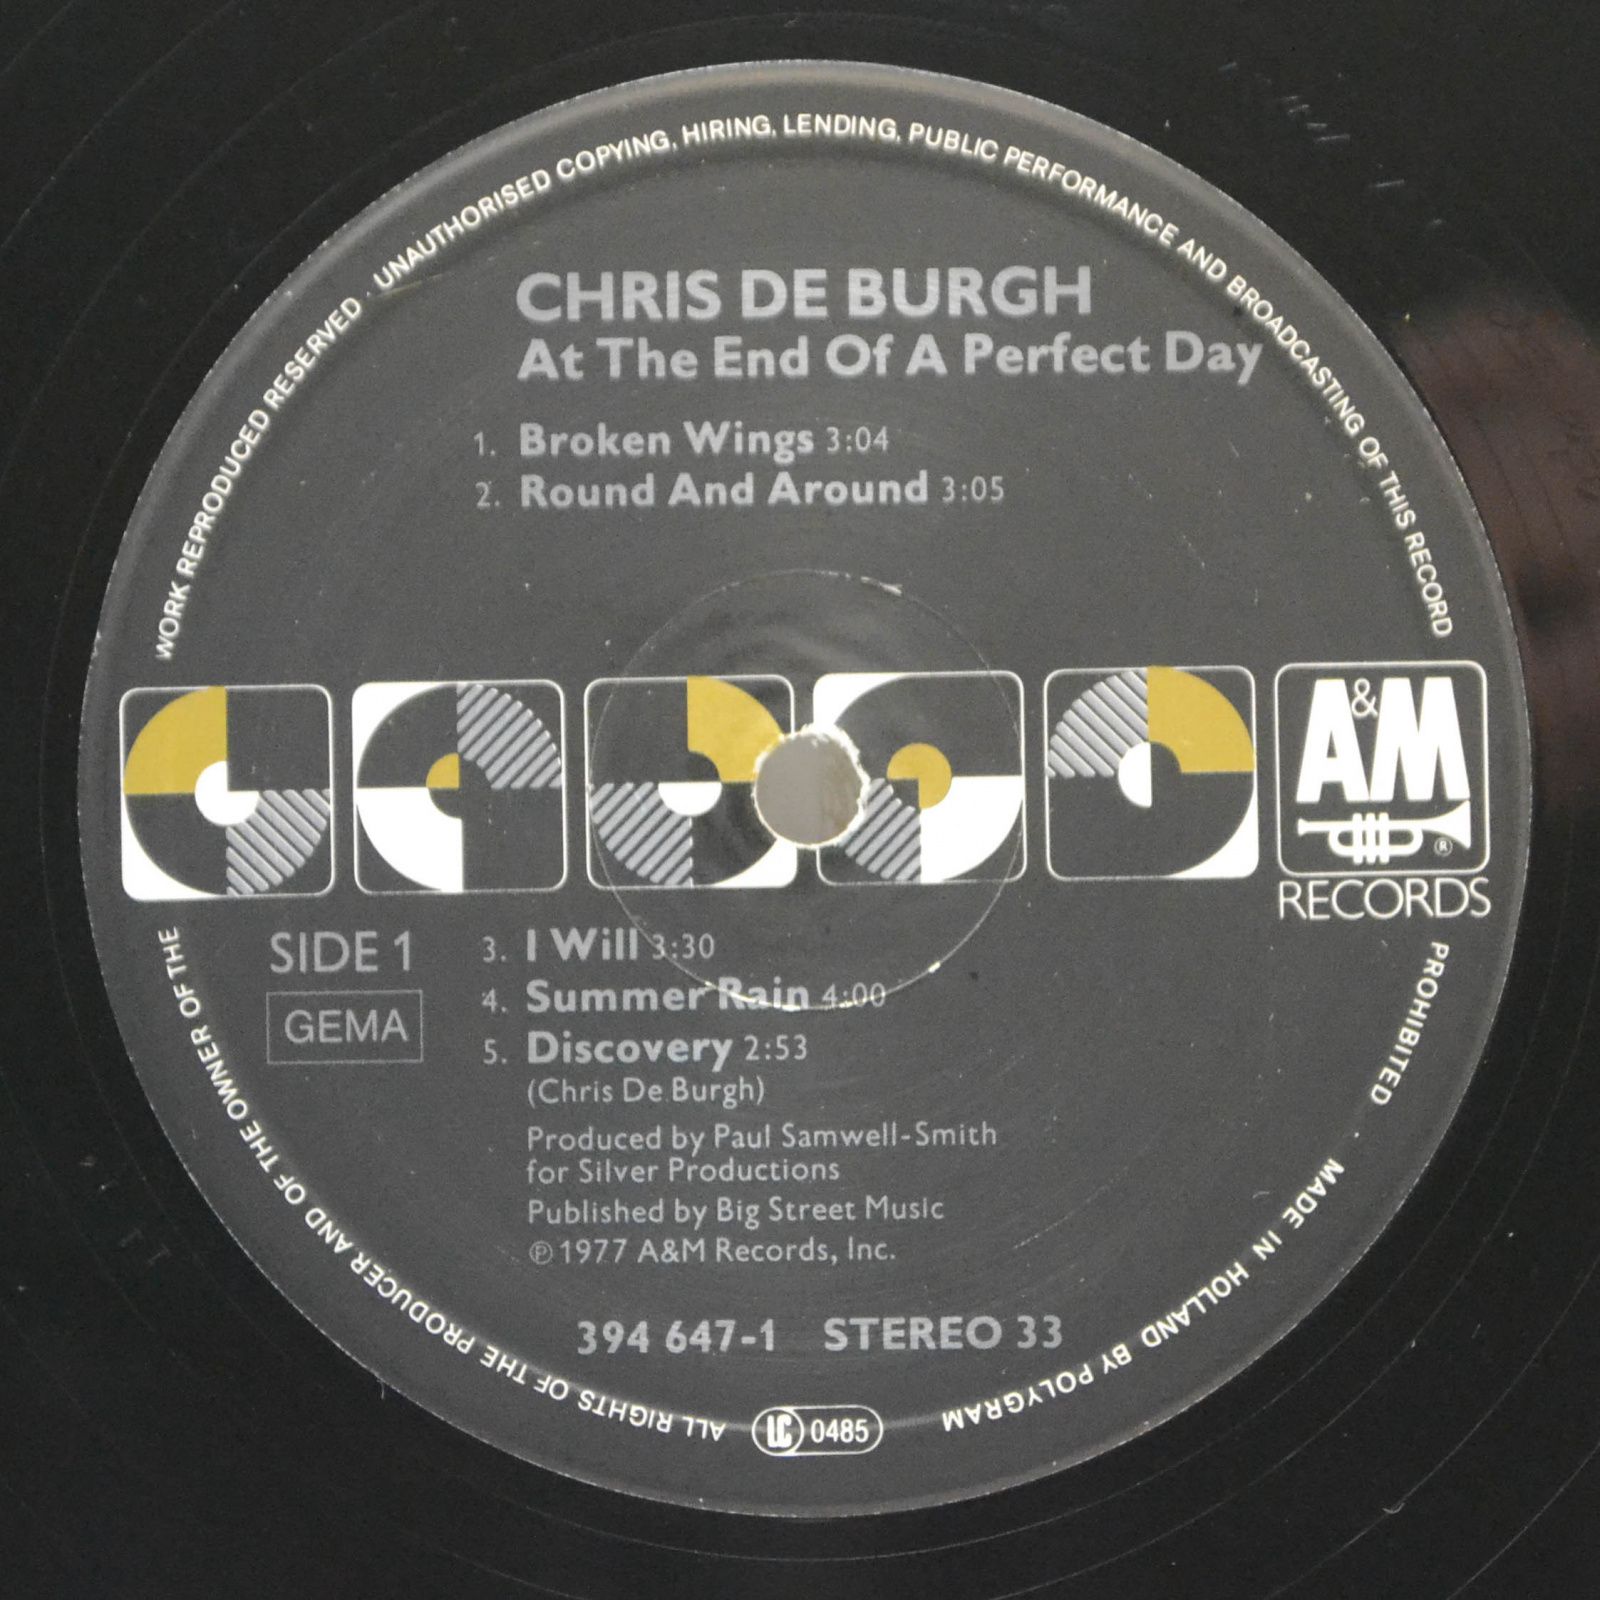 Chris de Burgh — At The End Of A Perfect Day, 1987